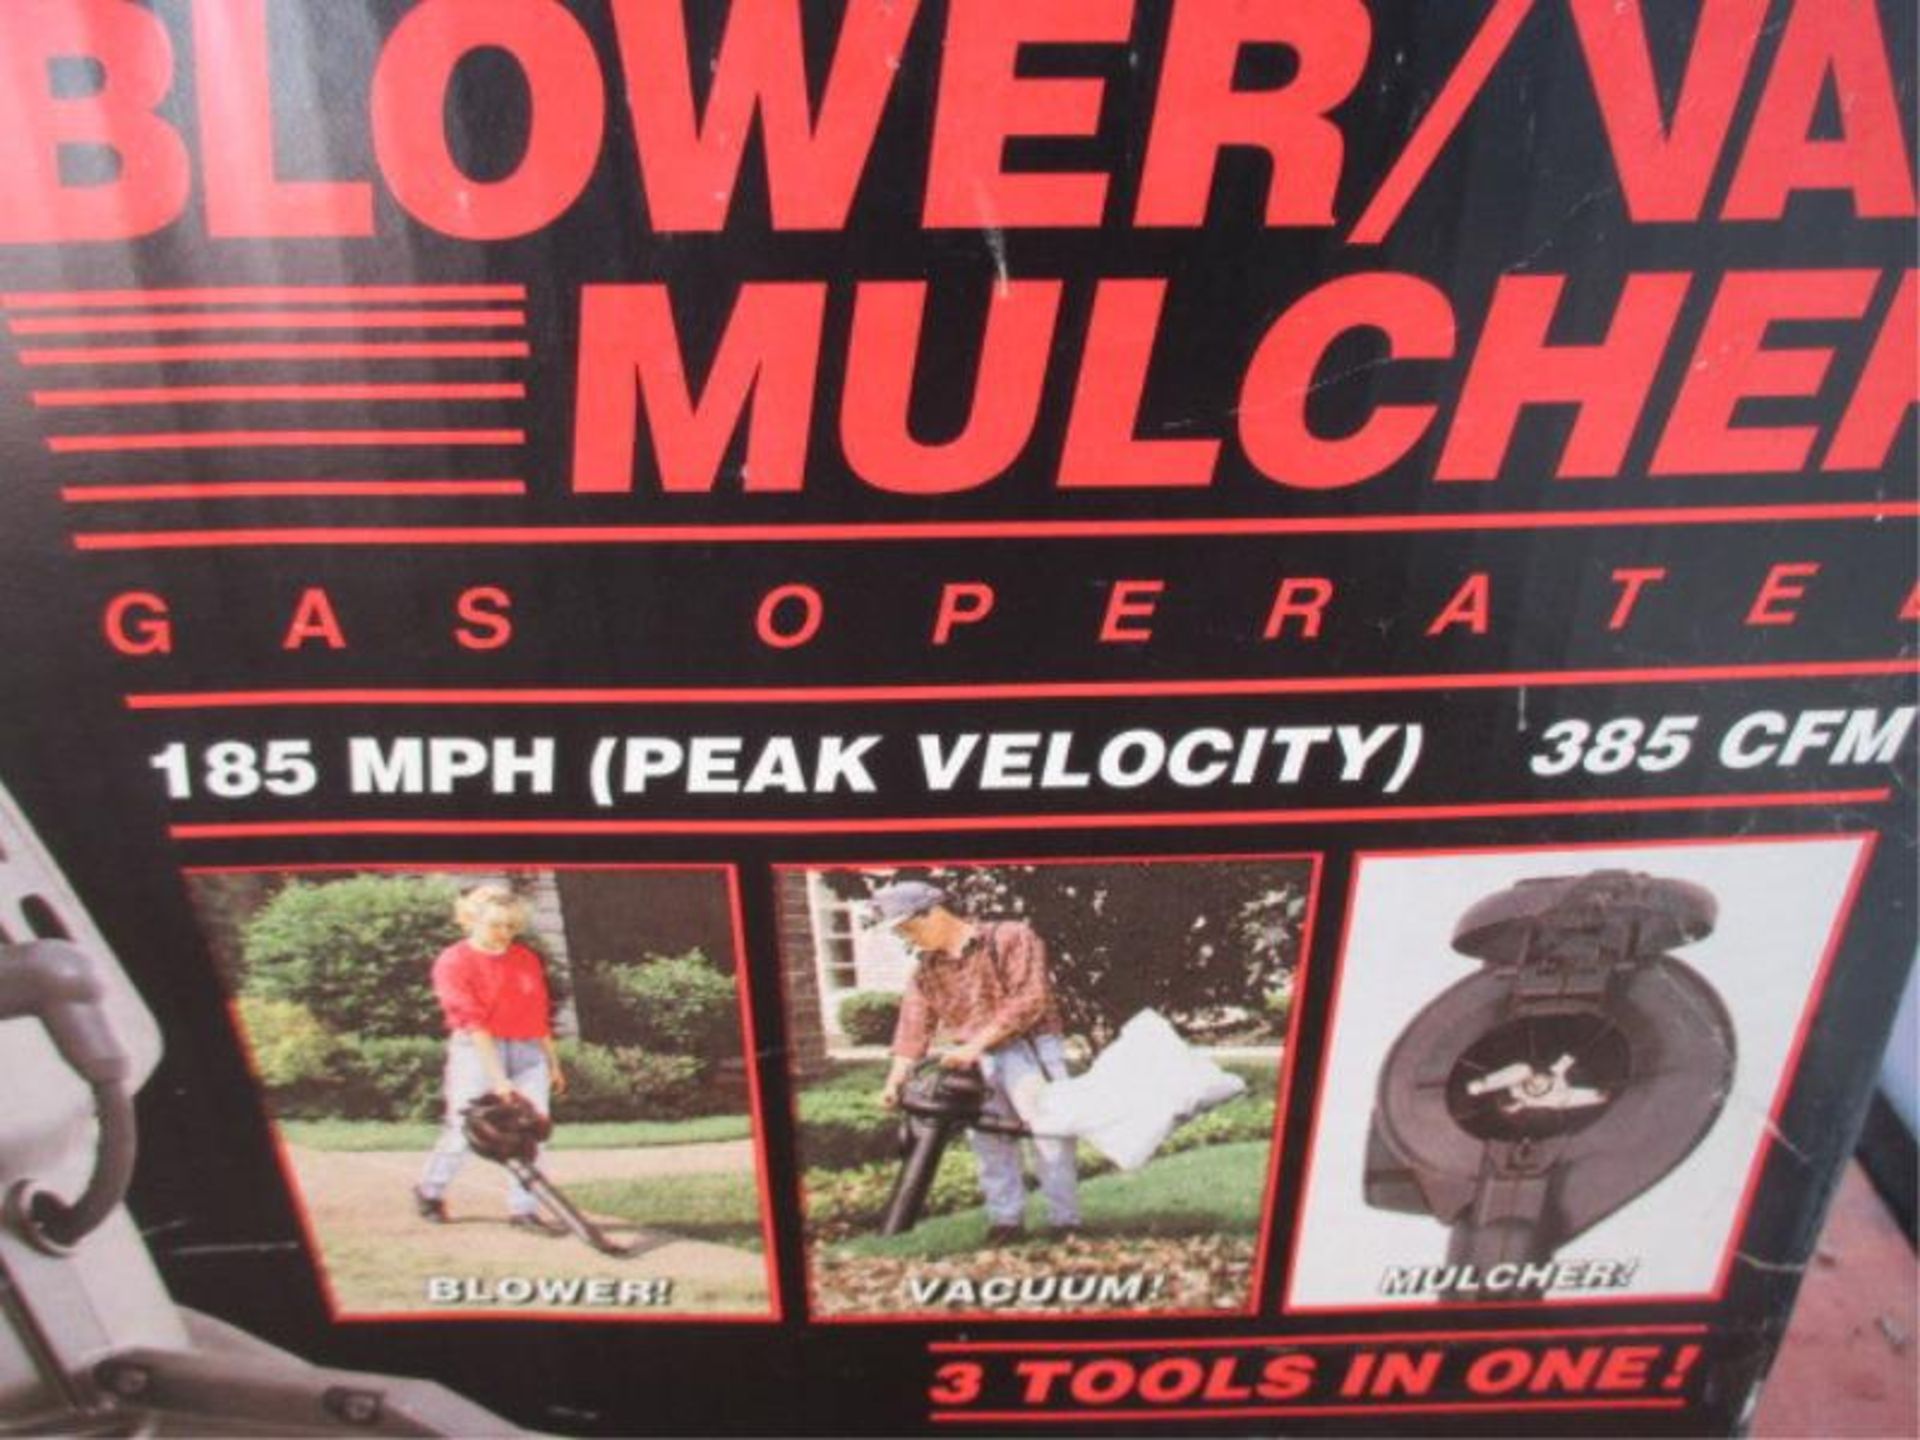 Craftsman Blower / Vac / Mulcher, Gas Operated, 185 MPH Peck Velocity, Model: 7179793, New in Box - Image 2 of 4